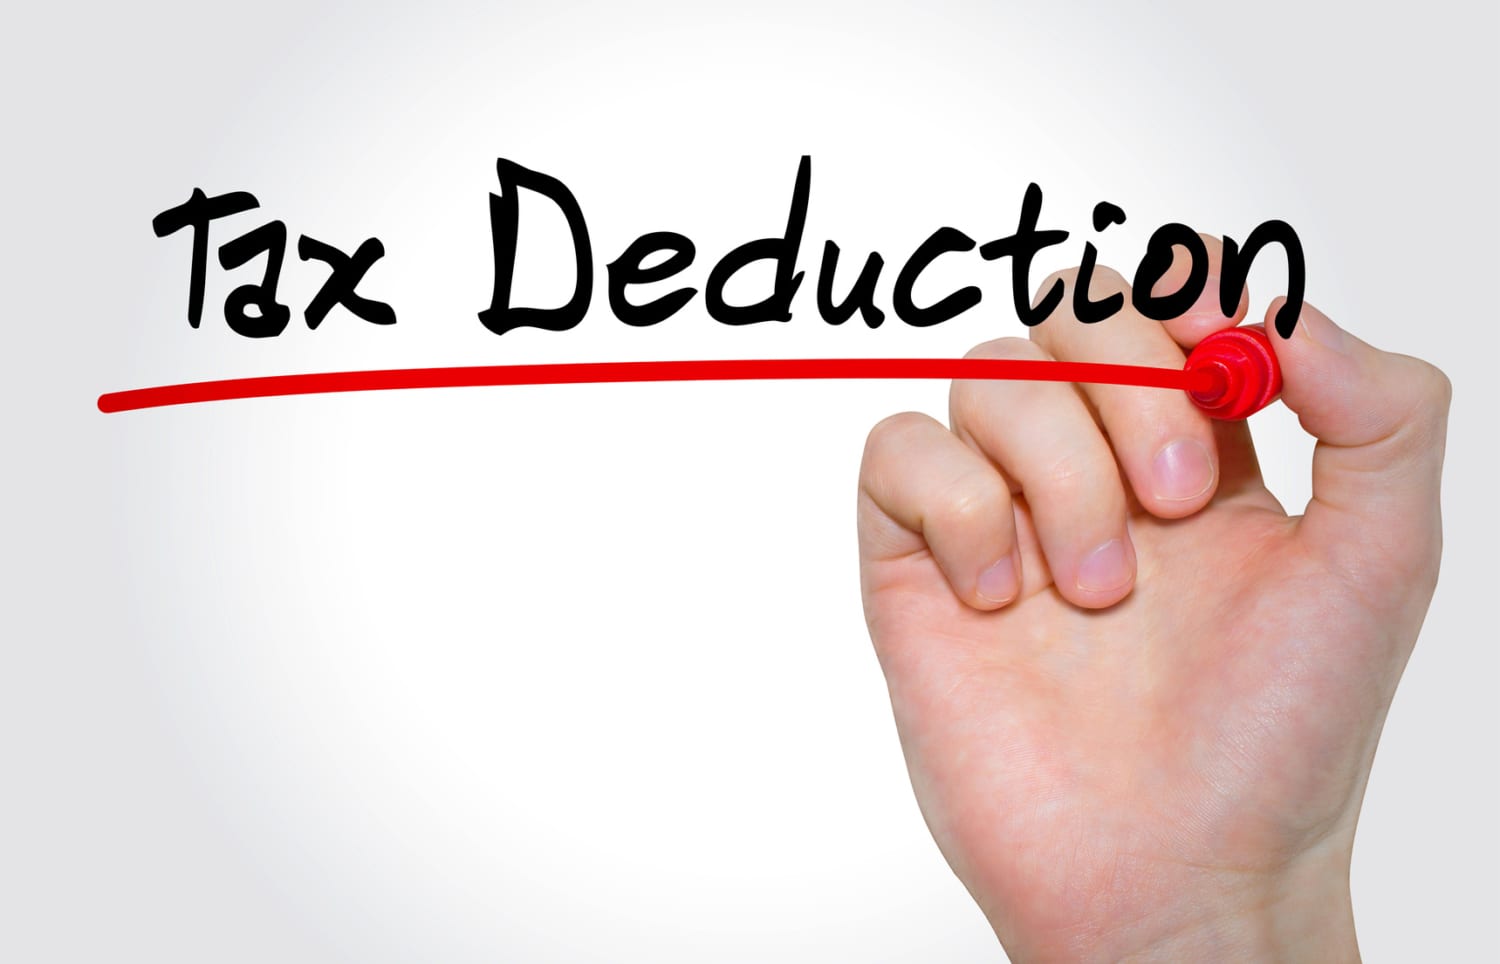 small business tax deductions checklist